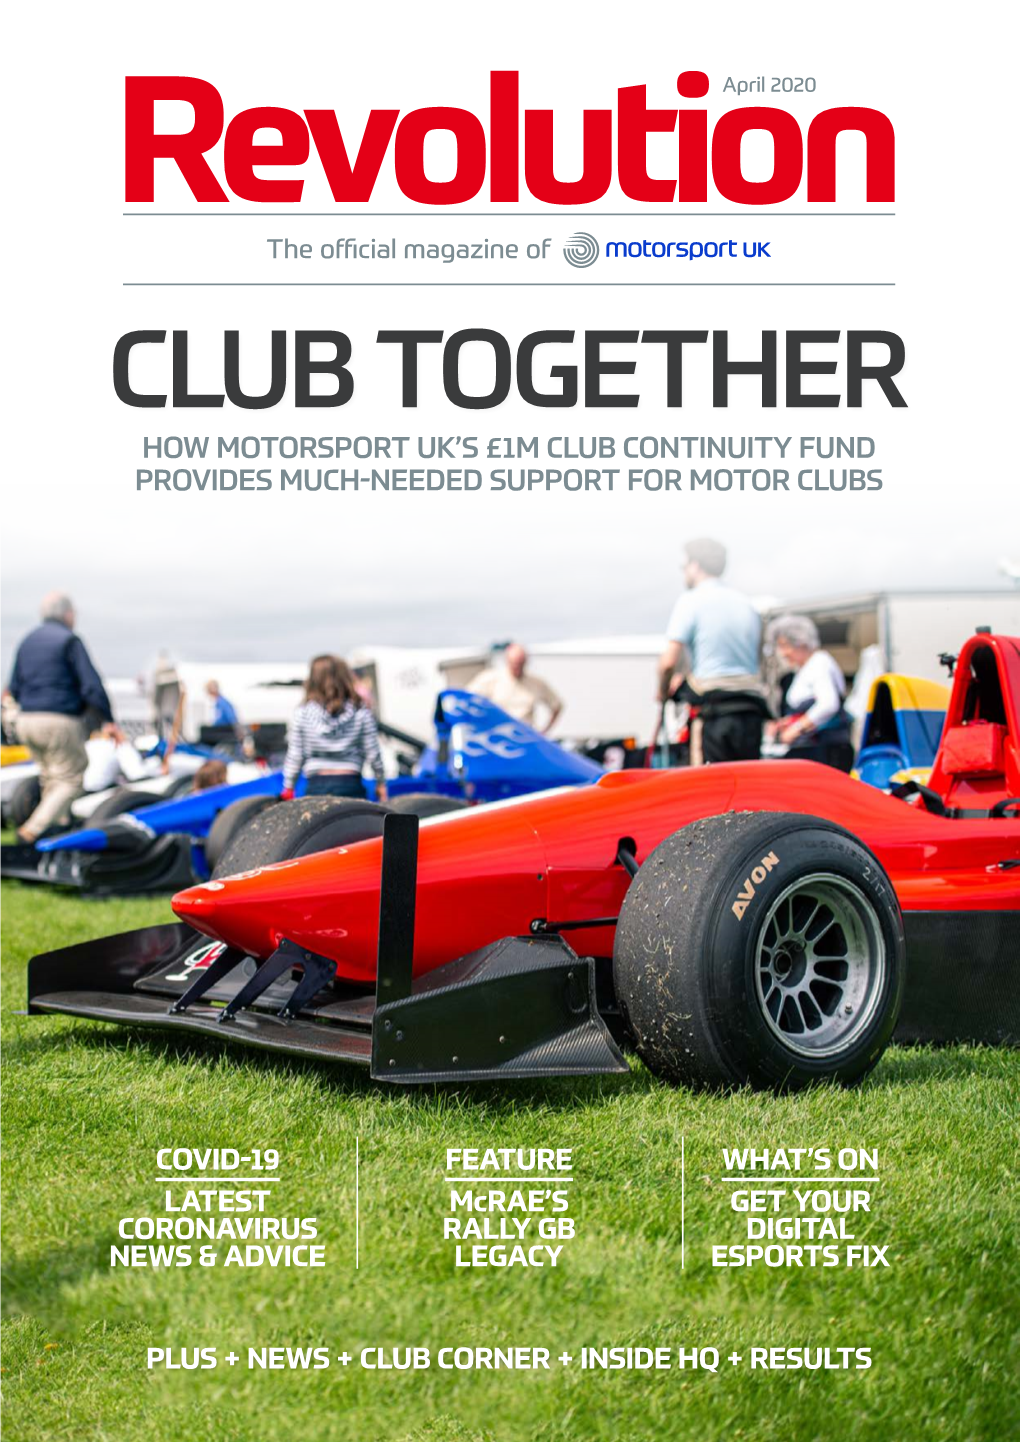 Club Together How Motorsport Uk’S £1M Club Continuity Fund Provides Much-Needed Support for Motor Clubs